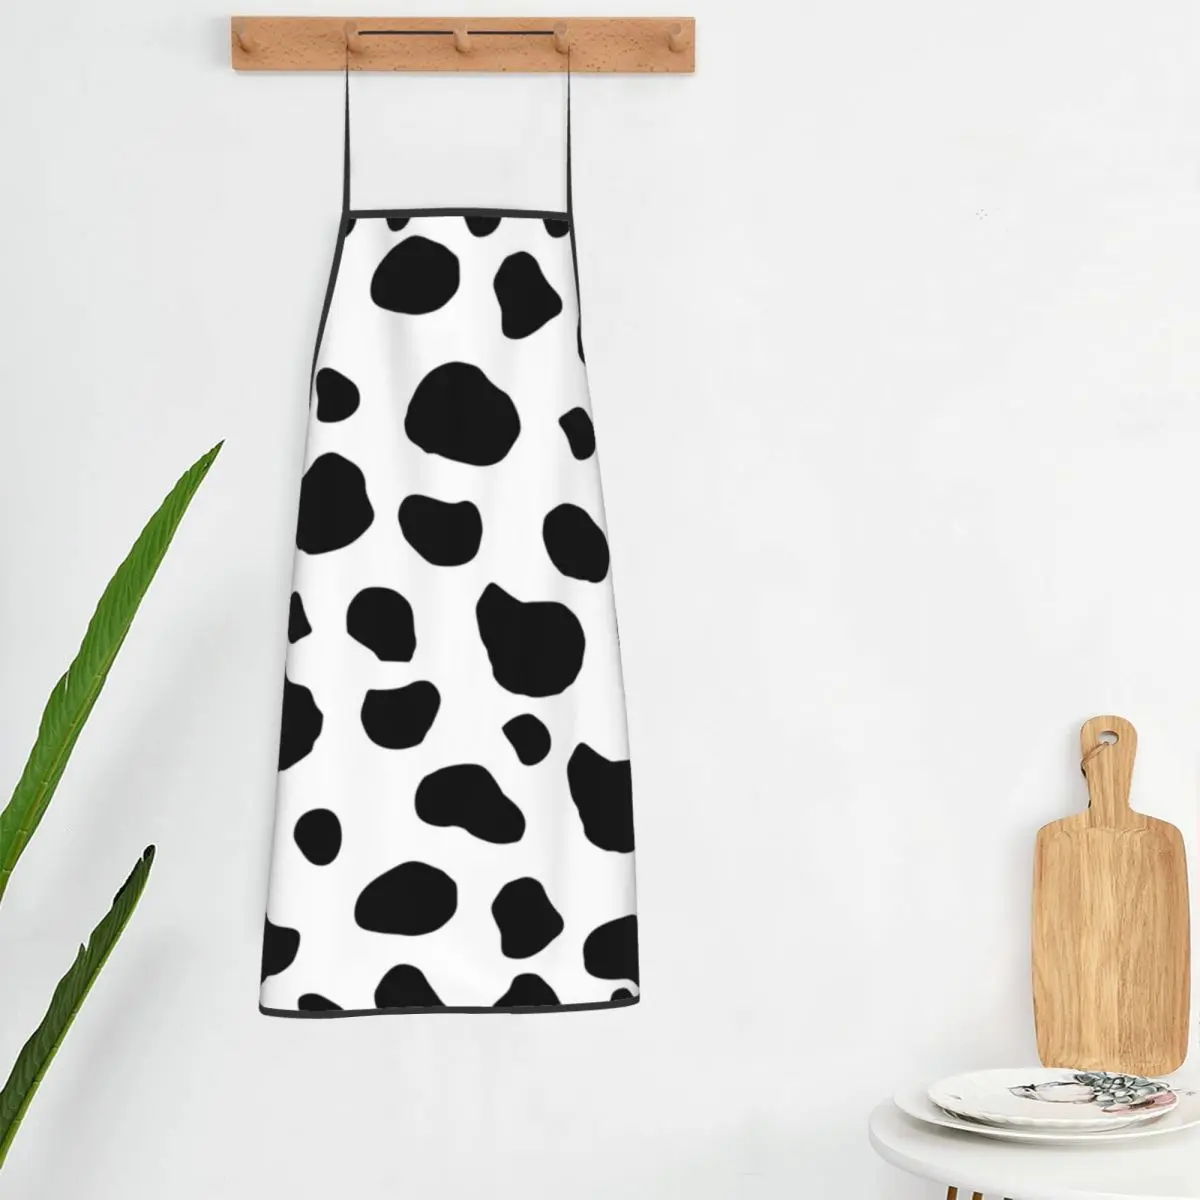 

Cow Print Spots Apron Black And White Animal Cooking Barber Kitchen Accessories Home Custom Aprons without Pocket